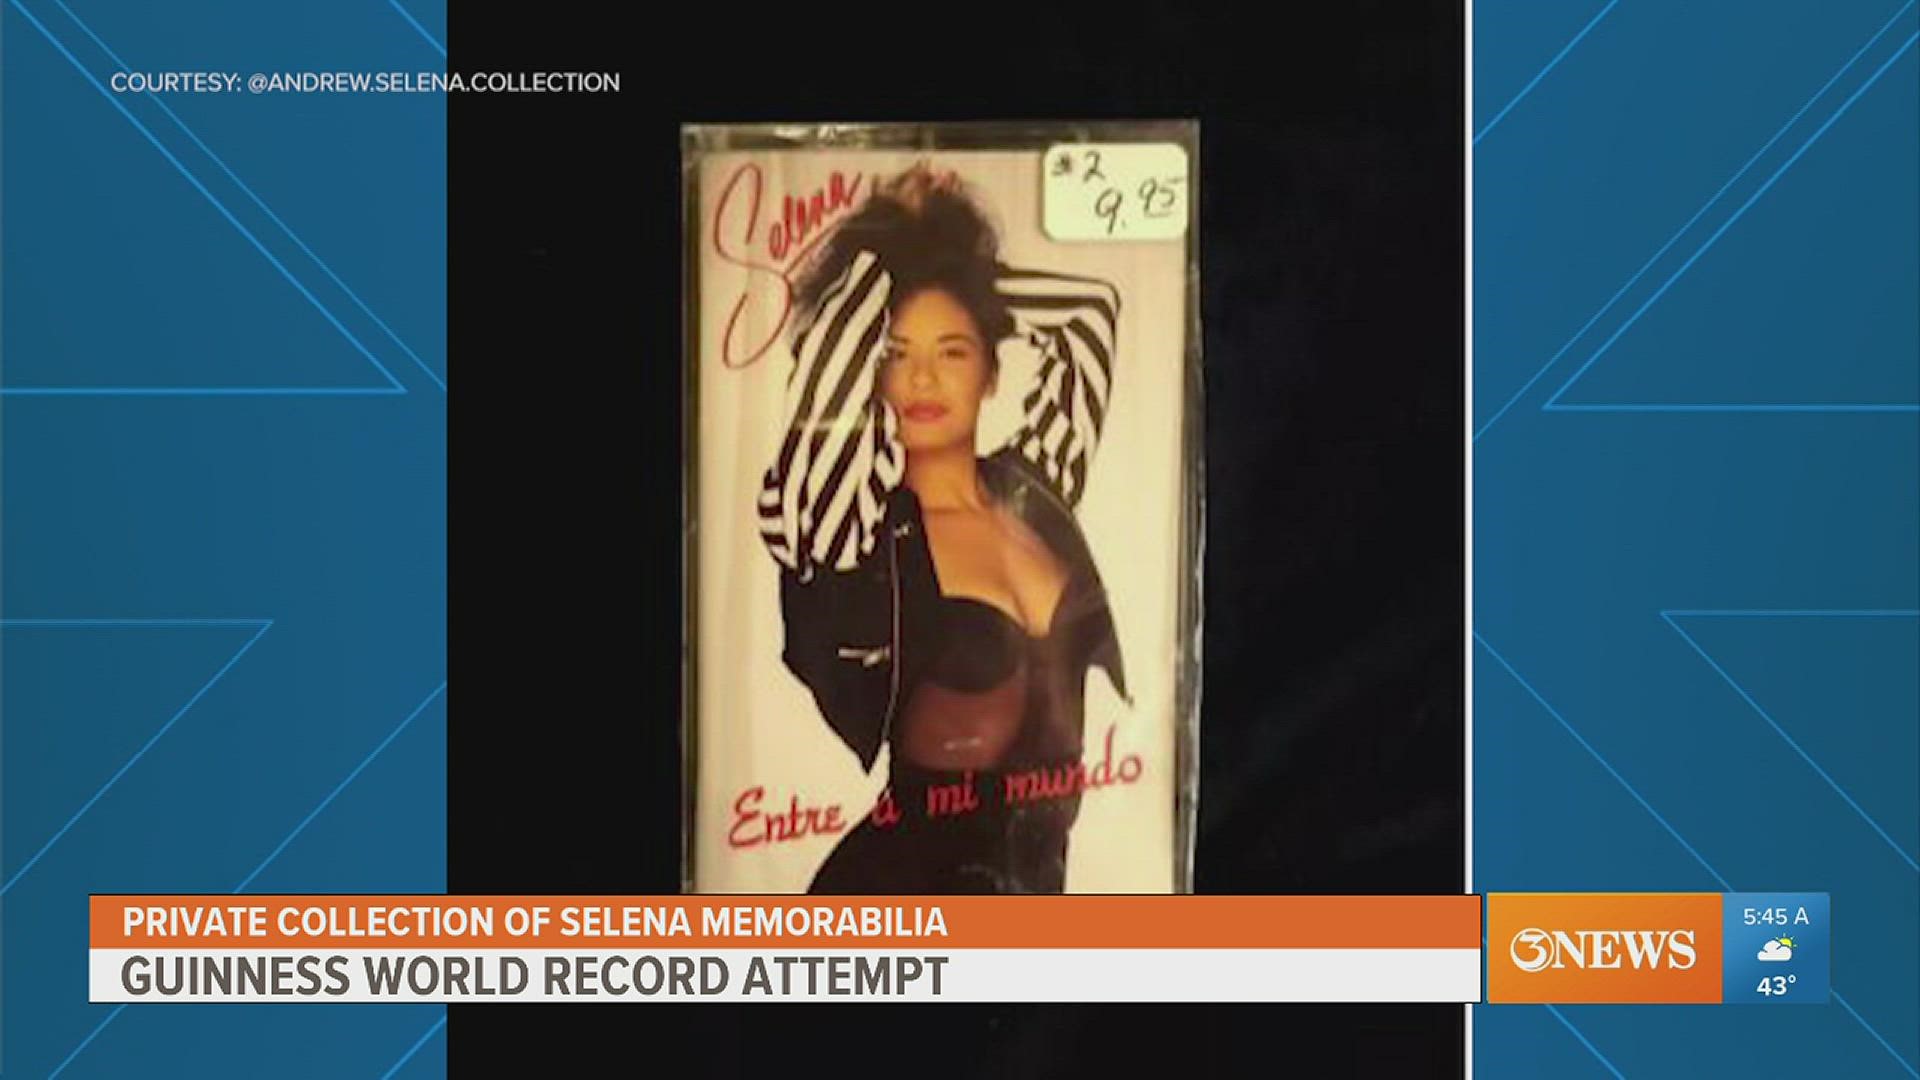 Andrew Longoria's Selena collection has over 1,500 pieces including makeup, figurines, t-shirts and dolls.